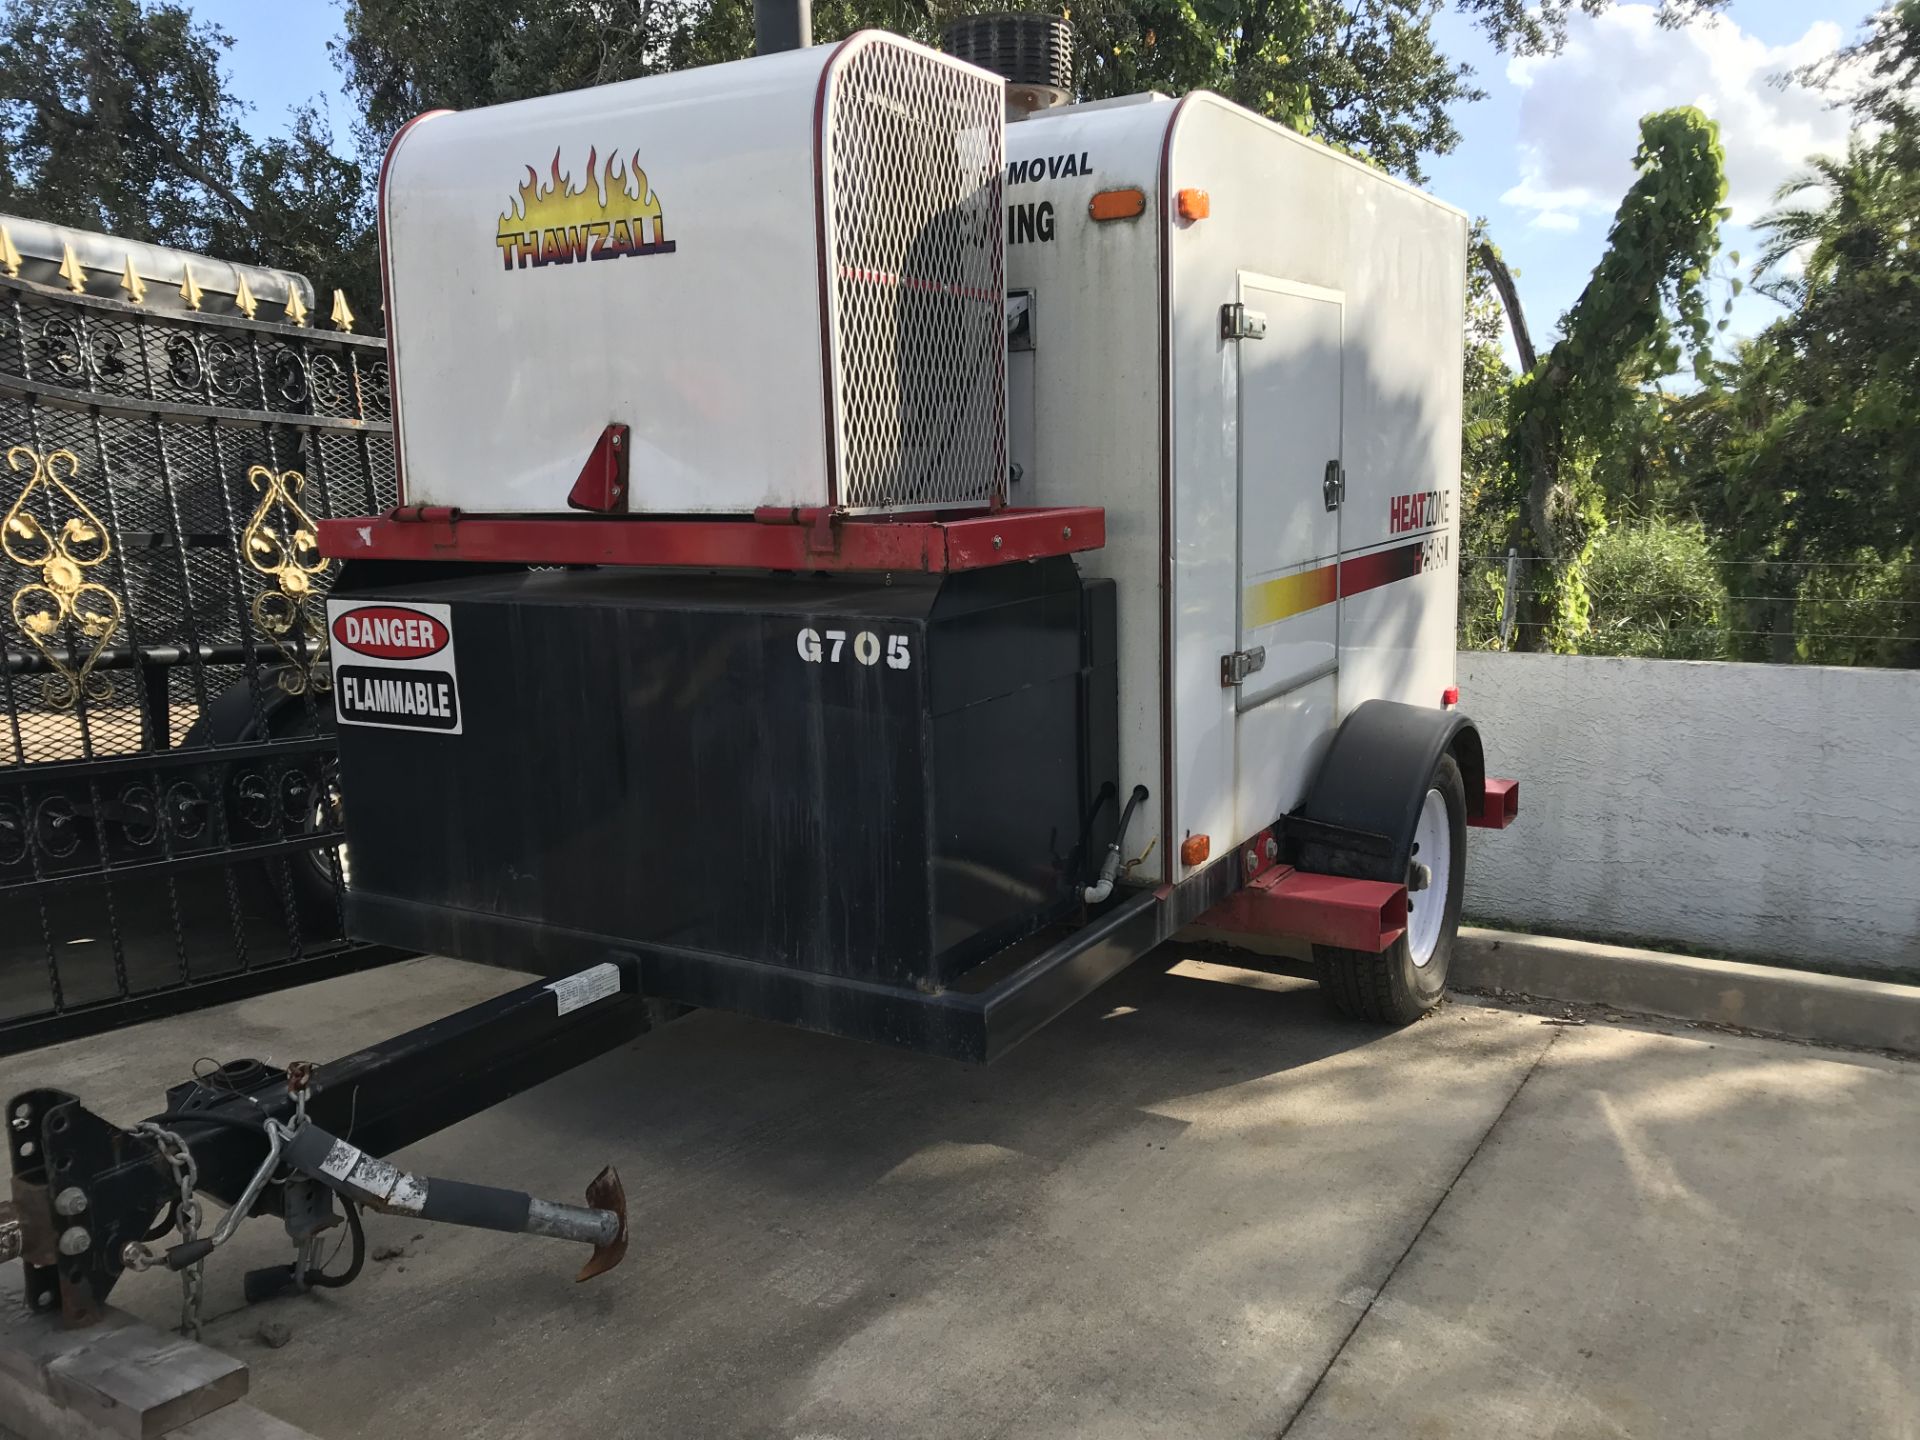 2012 THAWZAL H250SL TOWABLE GROUND HYDRONIC HEATER WITH DIESEL GENERATOR